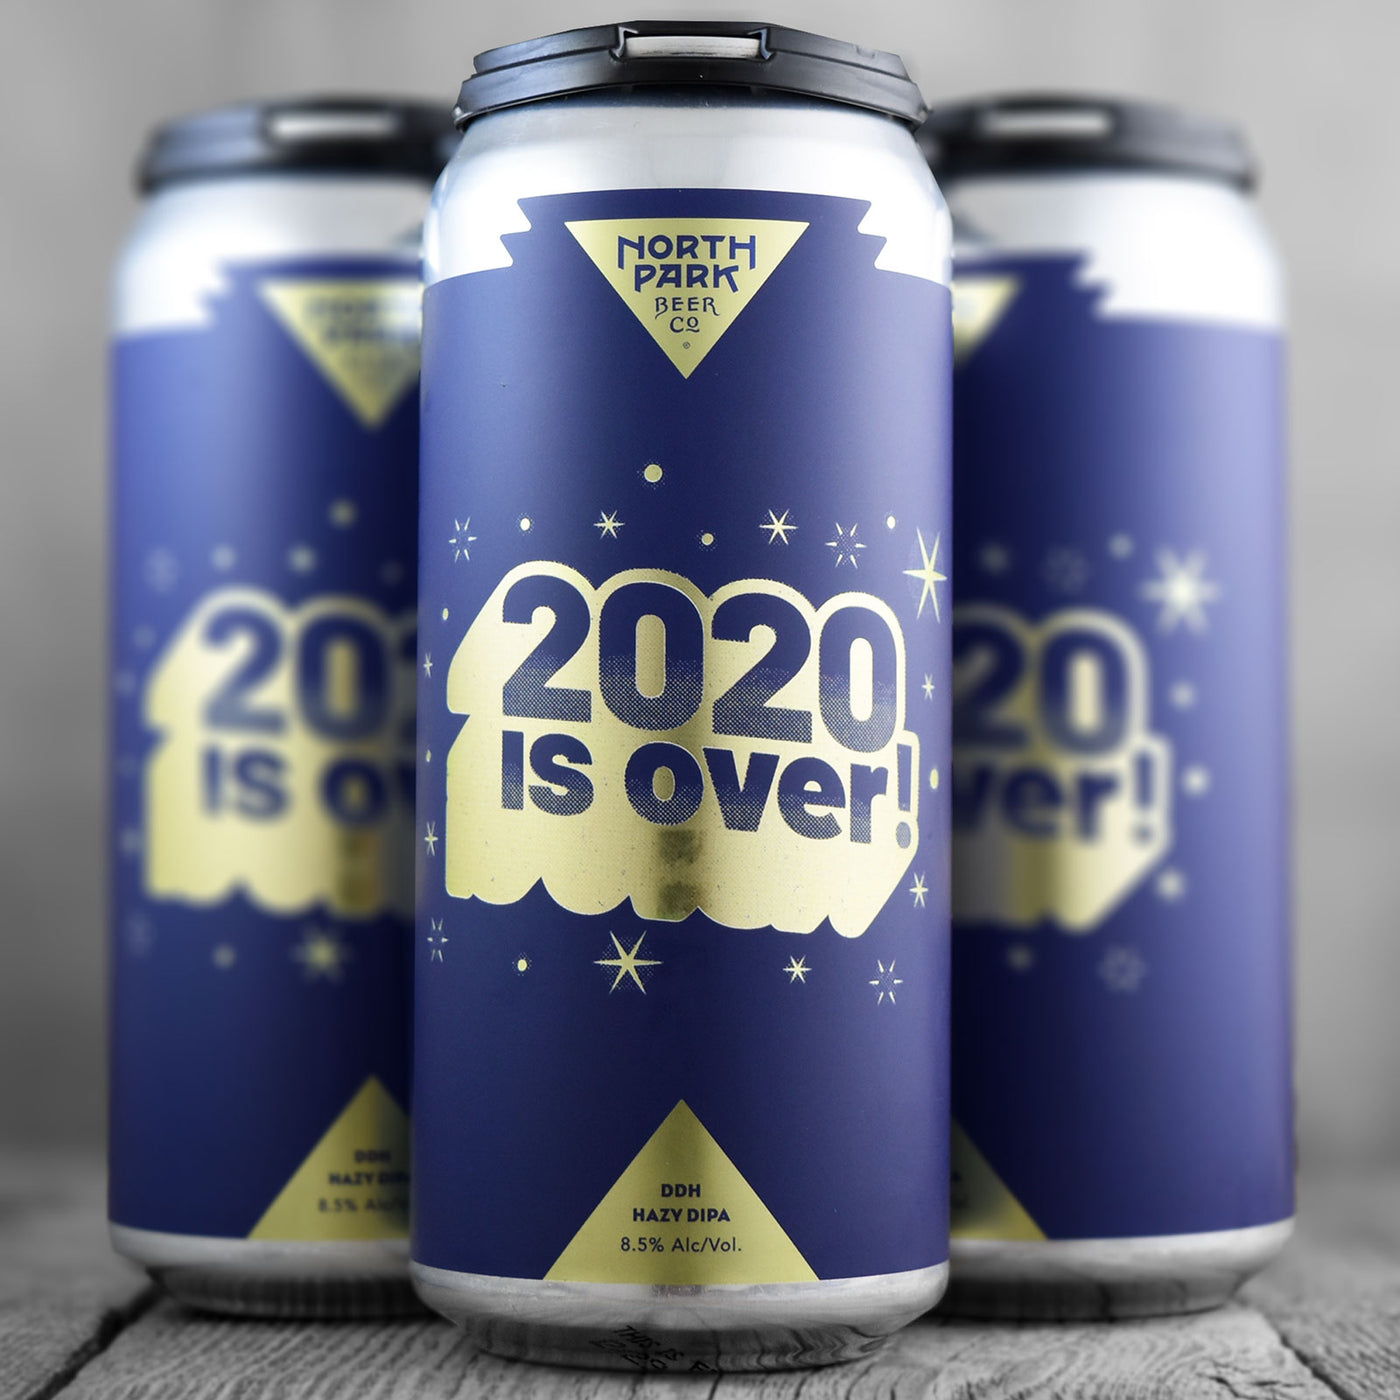 North Park Beer Co. 2020 Is Over